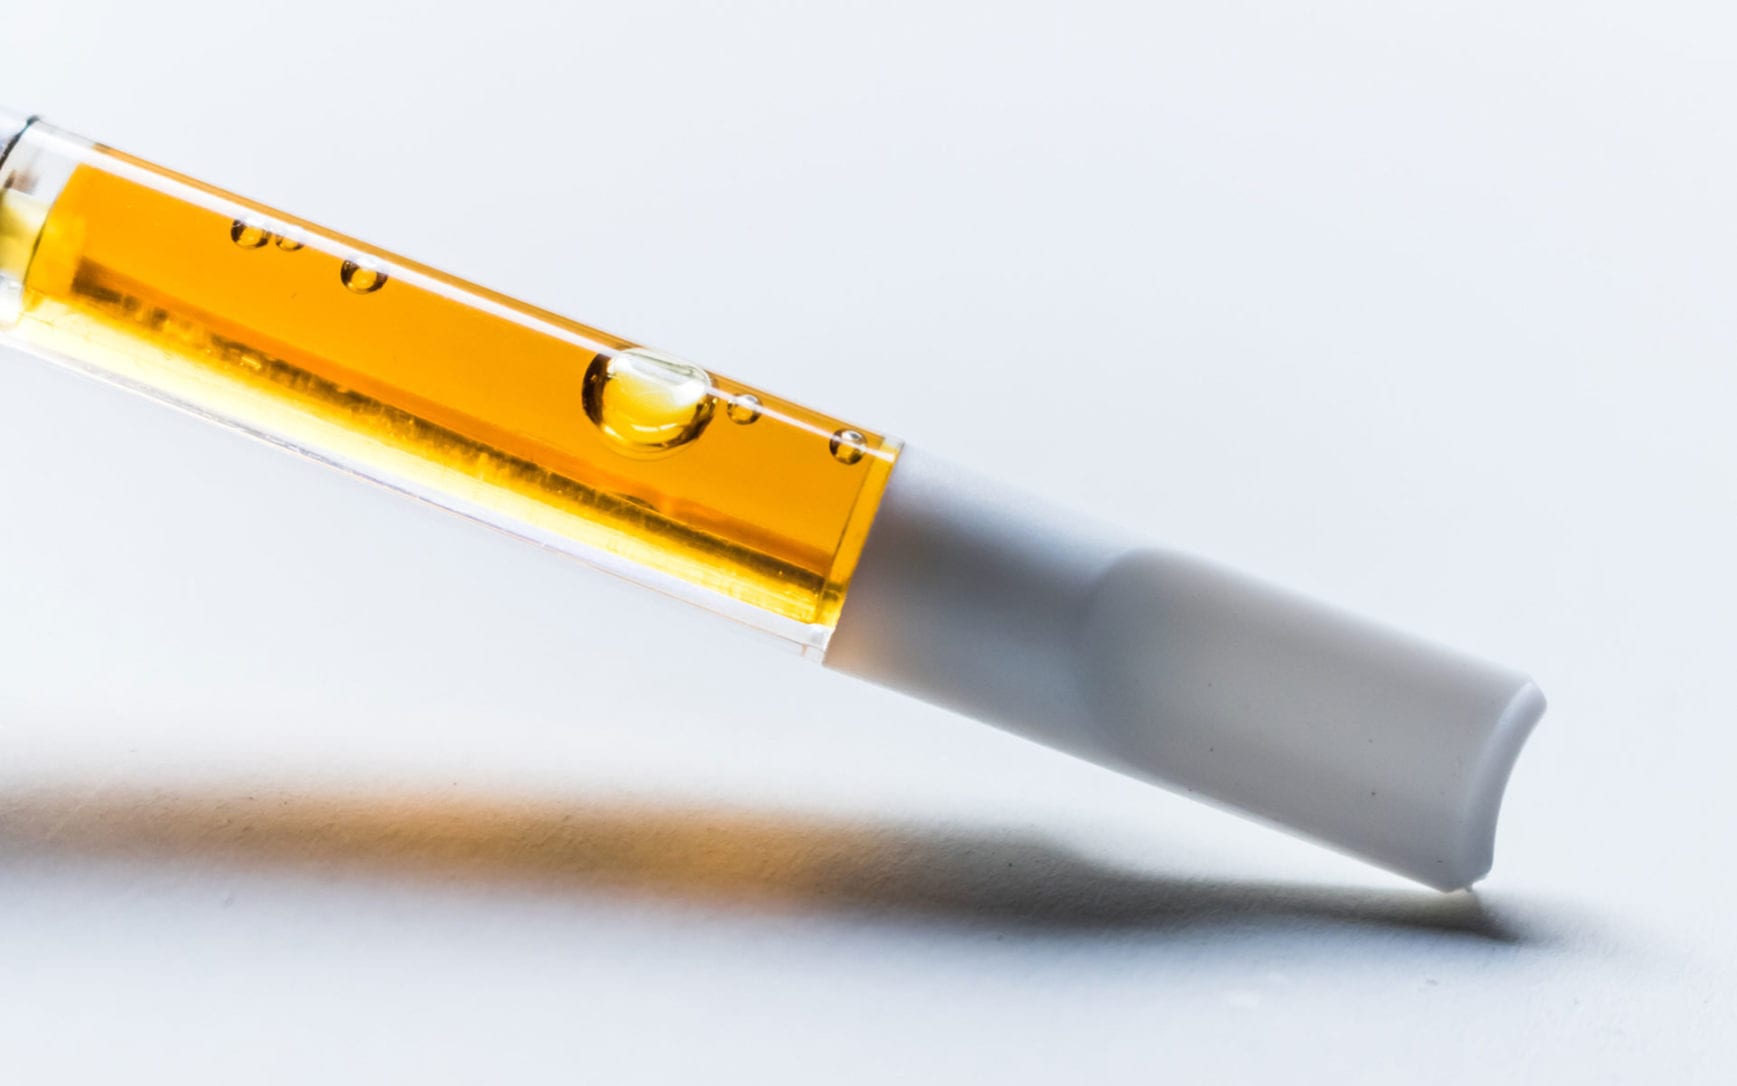 Leafly's investigation tracked a contaminated global supply chain for illicit market THC vape cartridges. (HighGradeRoots/iStock)